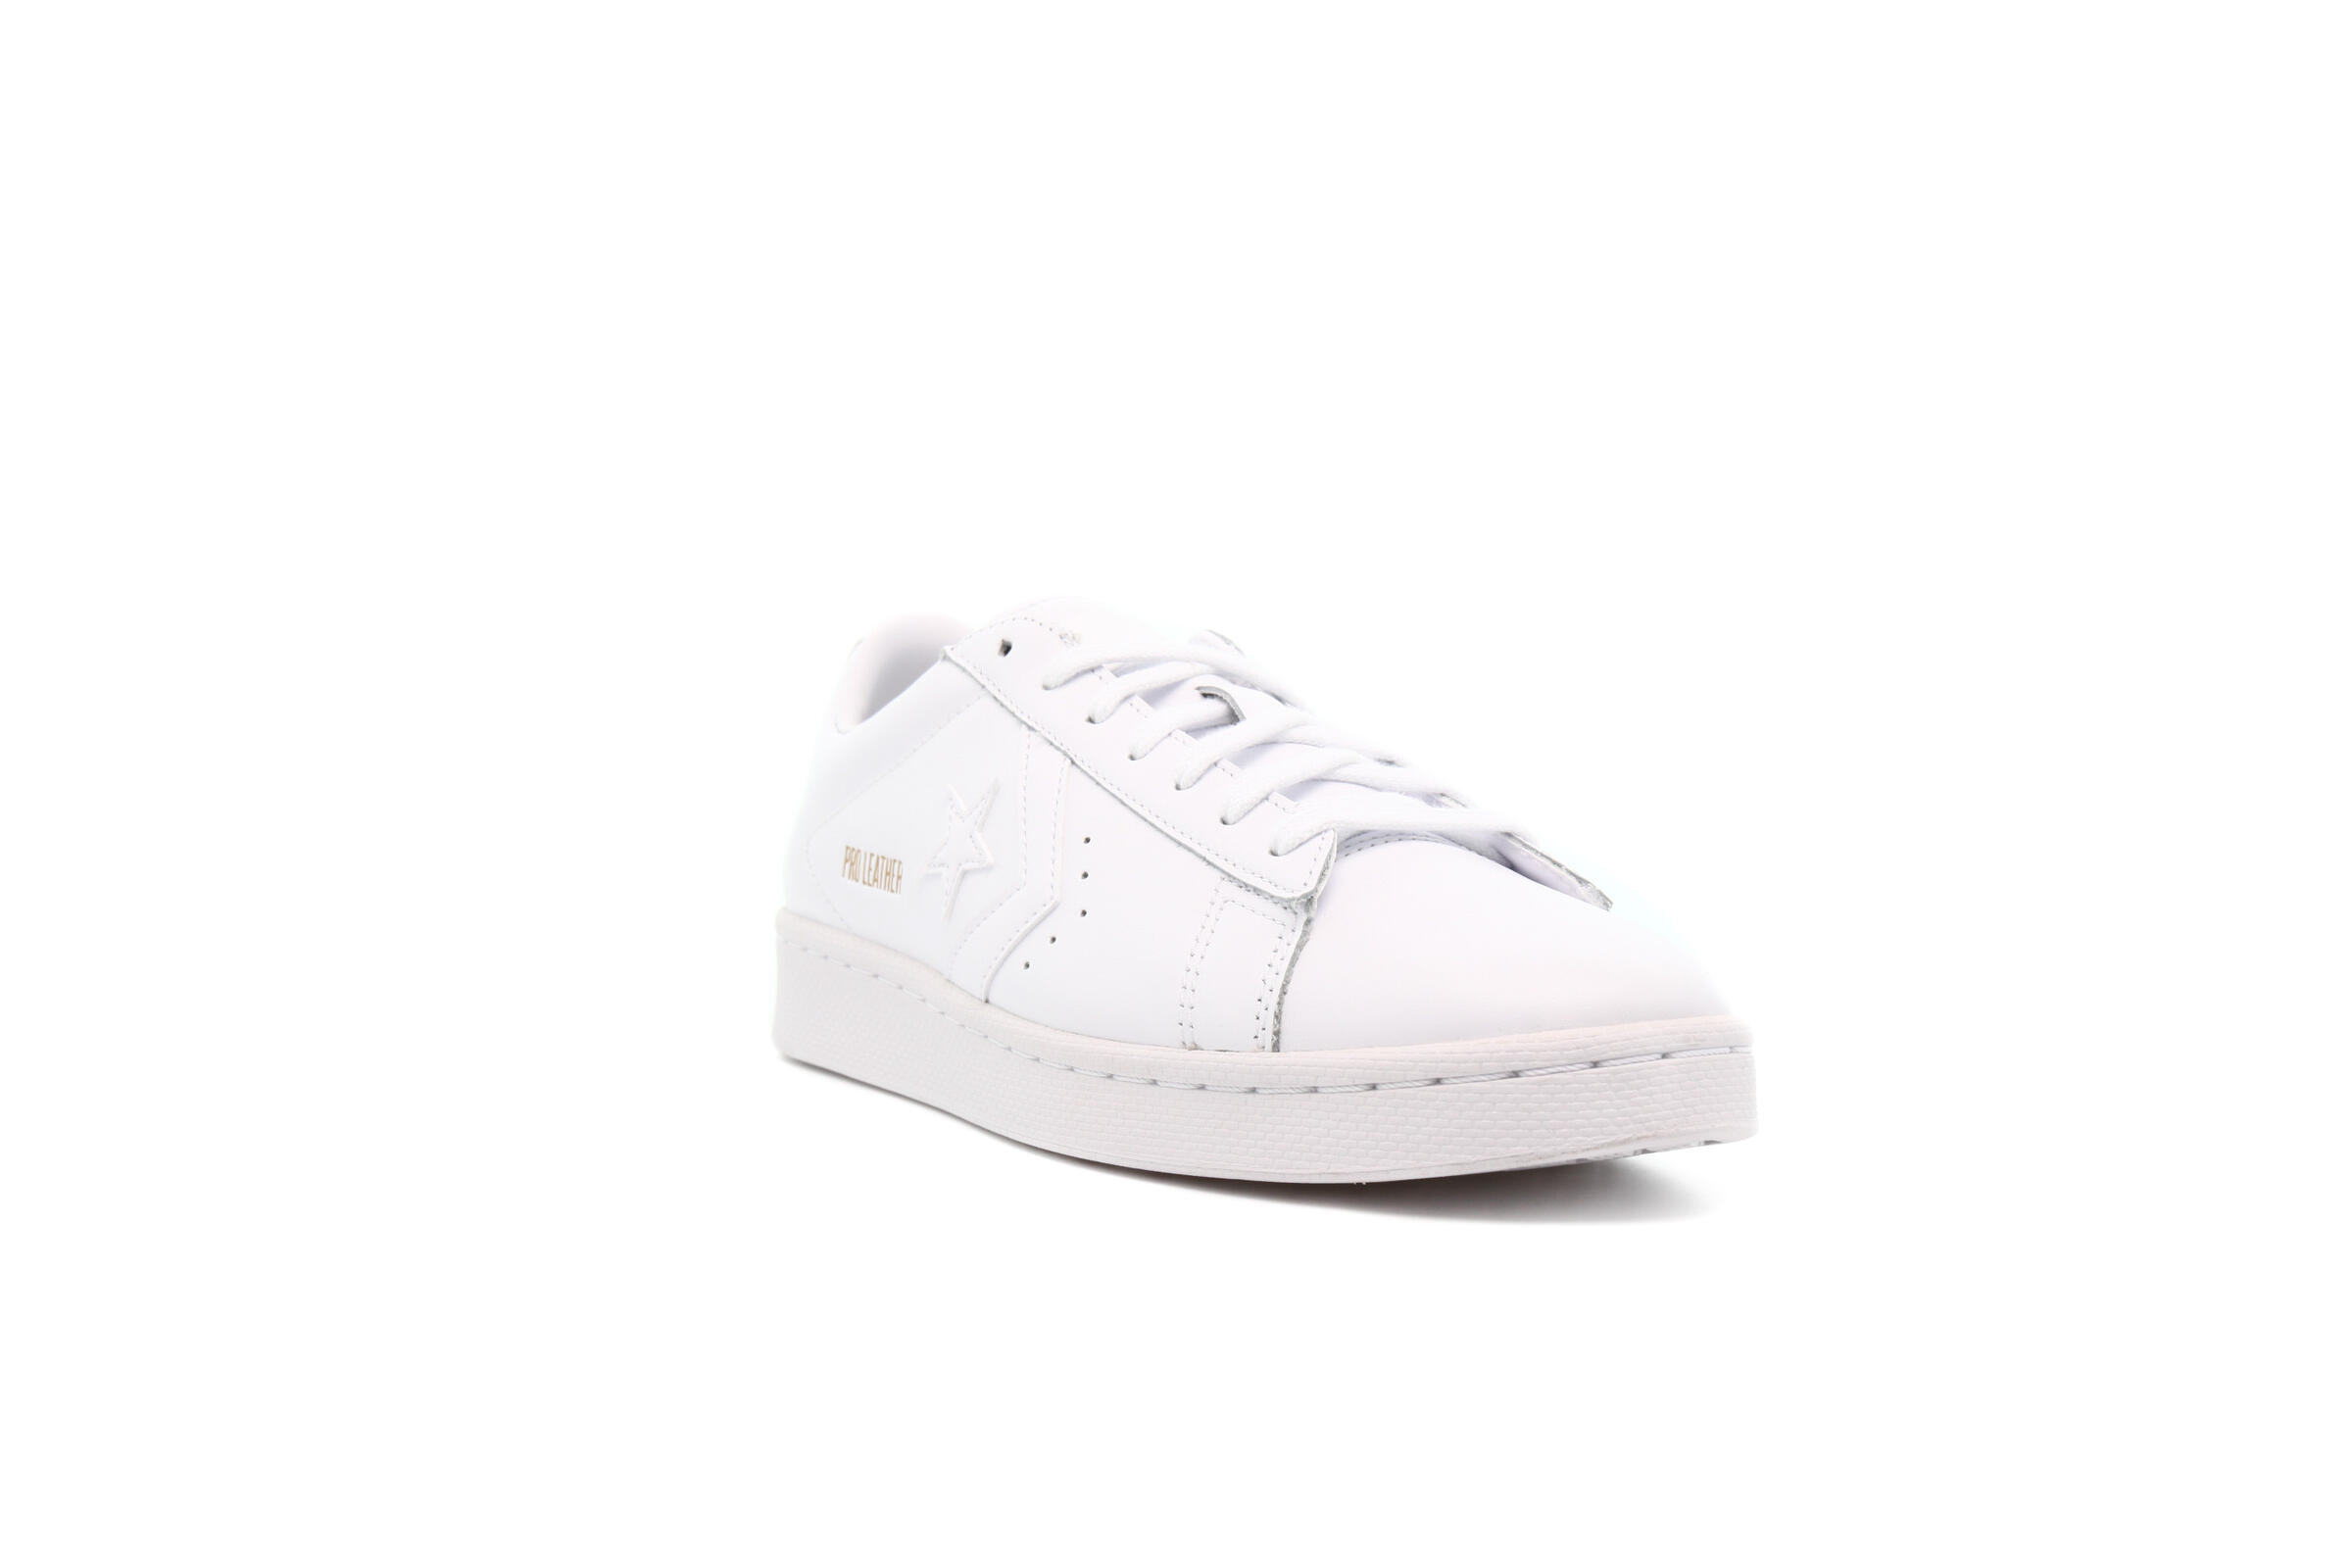 Converse PRO LEATHER OX "WHITE"